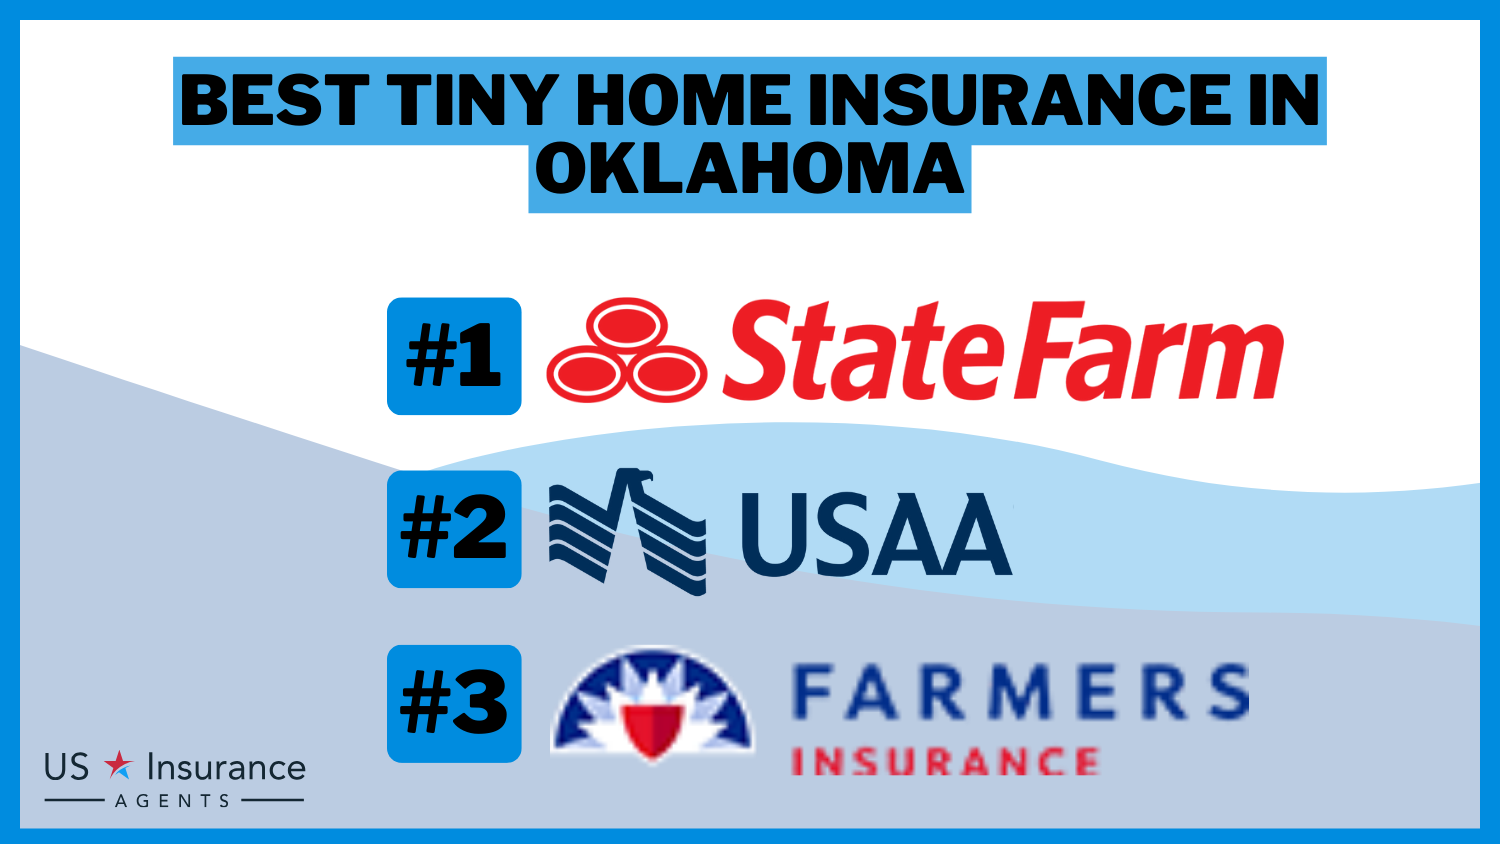 Best Tiny Home Insurance in Oklahoma: State Farm, USAA, and Farmers